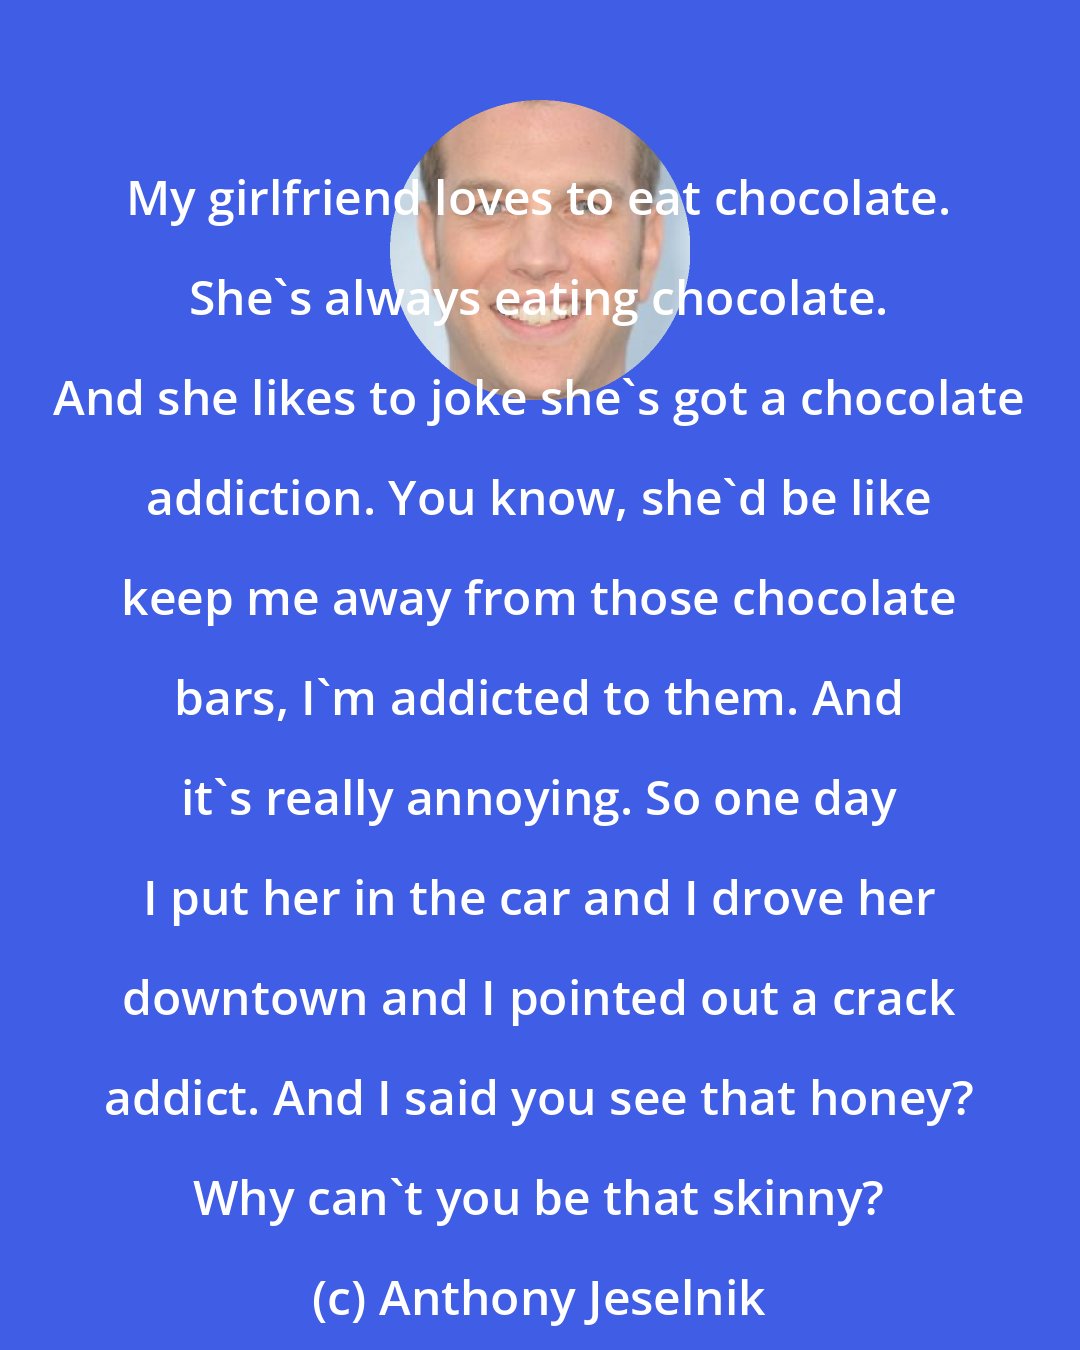 Anthony Jeselnik: My girlfriend loves to eat chocolate. She's always eating chocolate. And she likes to joke she's got a chocolate addiction. You know, she'd be like keep me away from those chocolate bars, I'm addicted to them. And it's really annoying. So one day I put her in the car and I drove her downtown and I pointed out a crack addict. And I said you see that honey? Why can't you be that skinny?